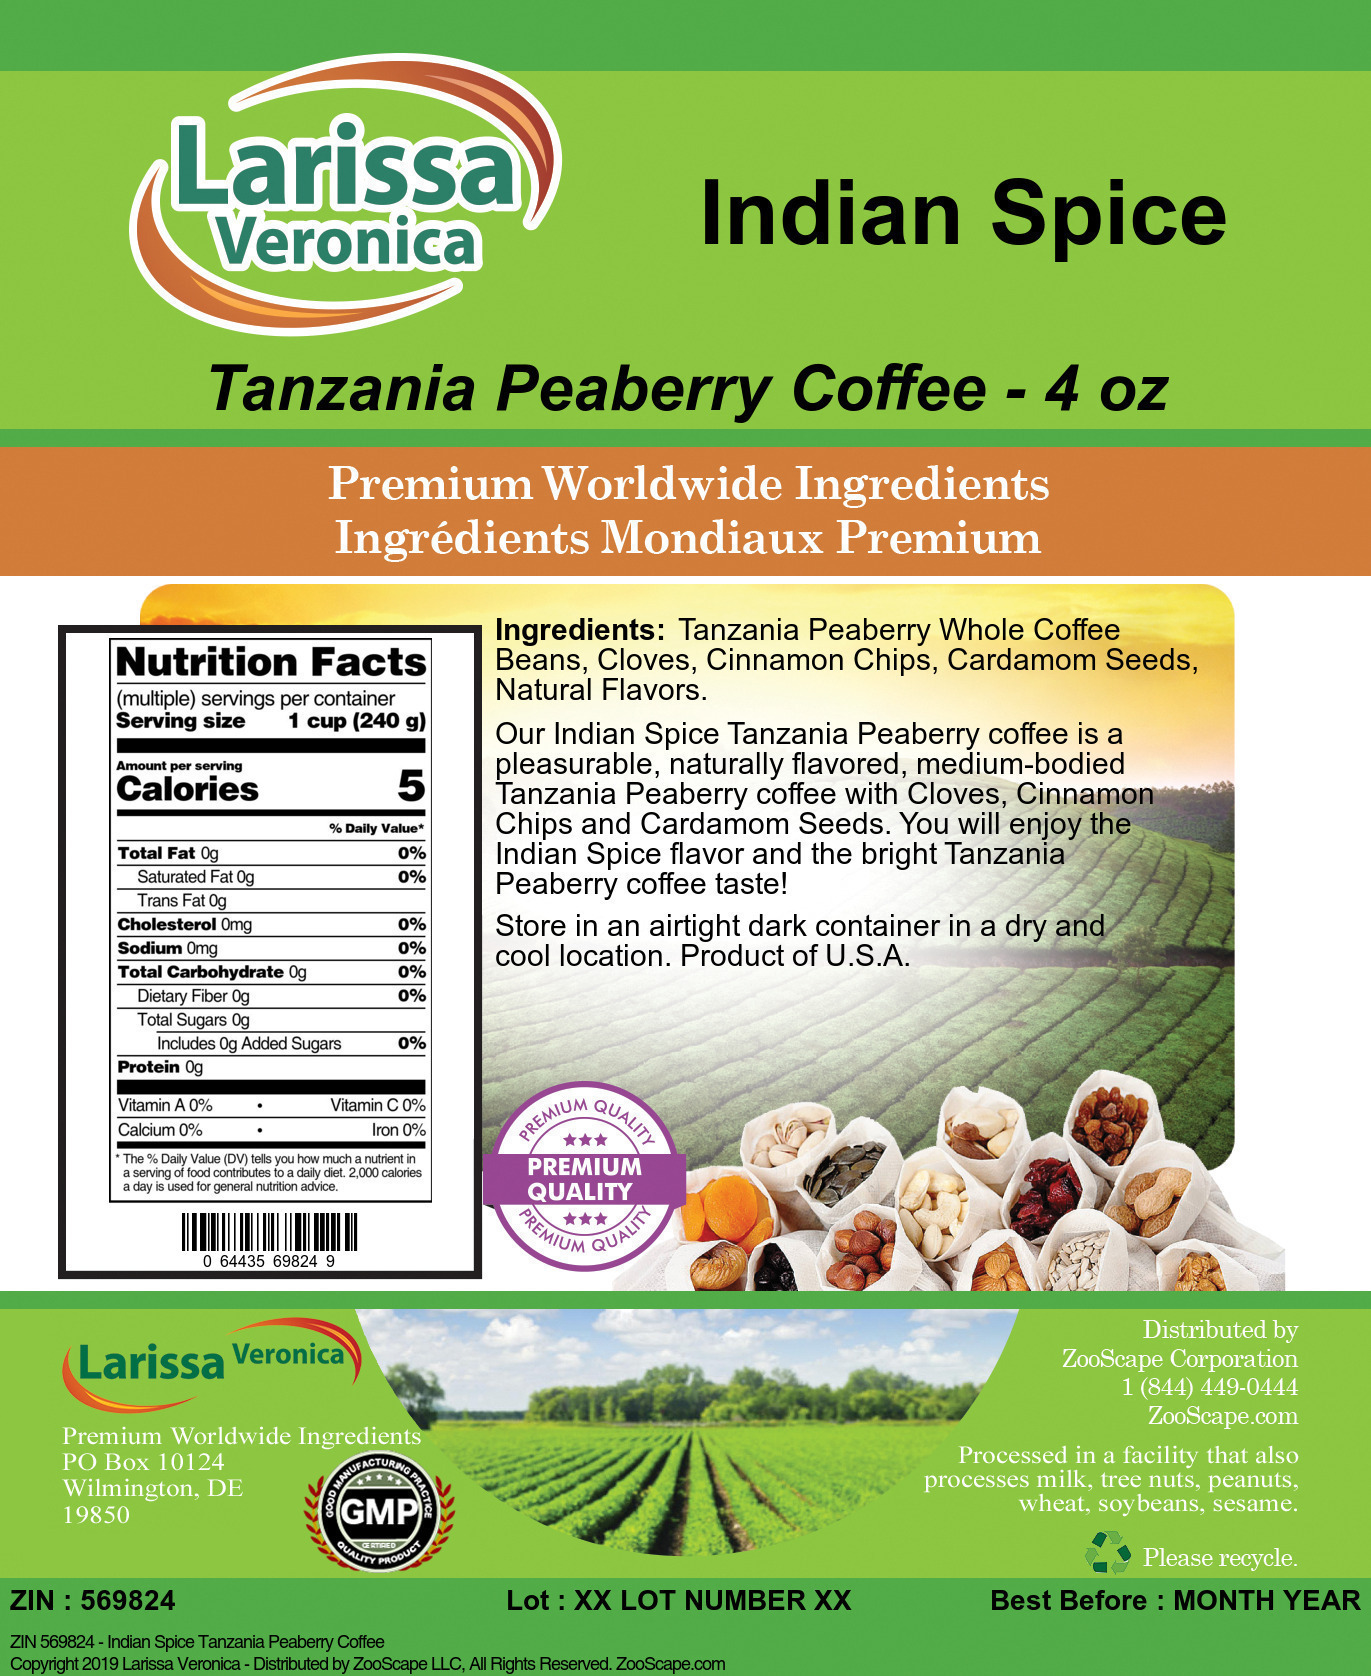 Indian Spice Tanzania Peaberry Coffee - Label